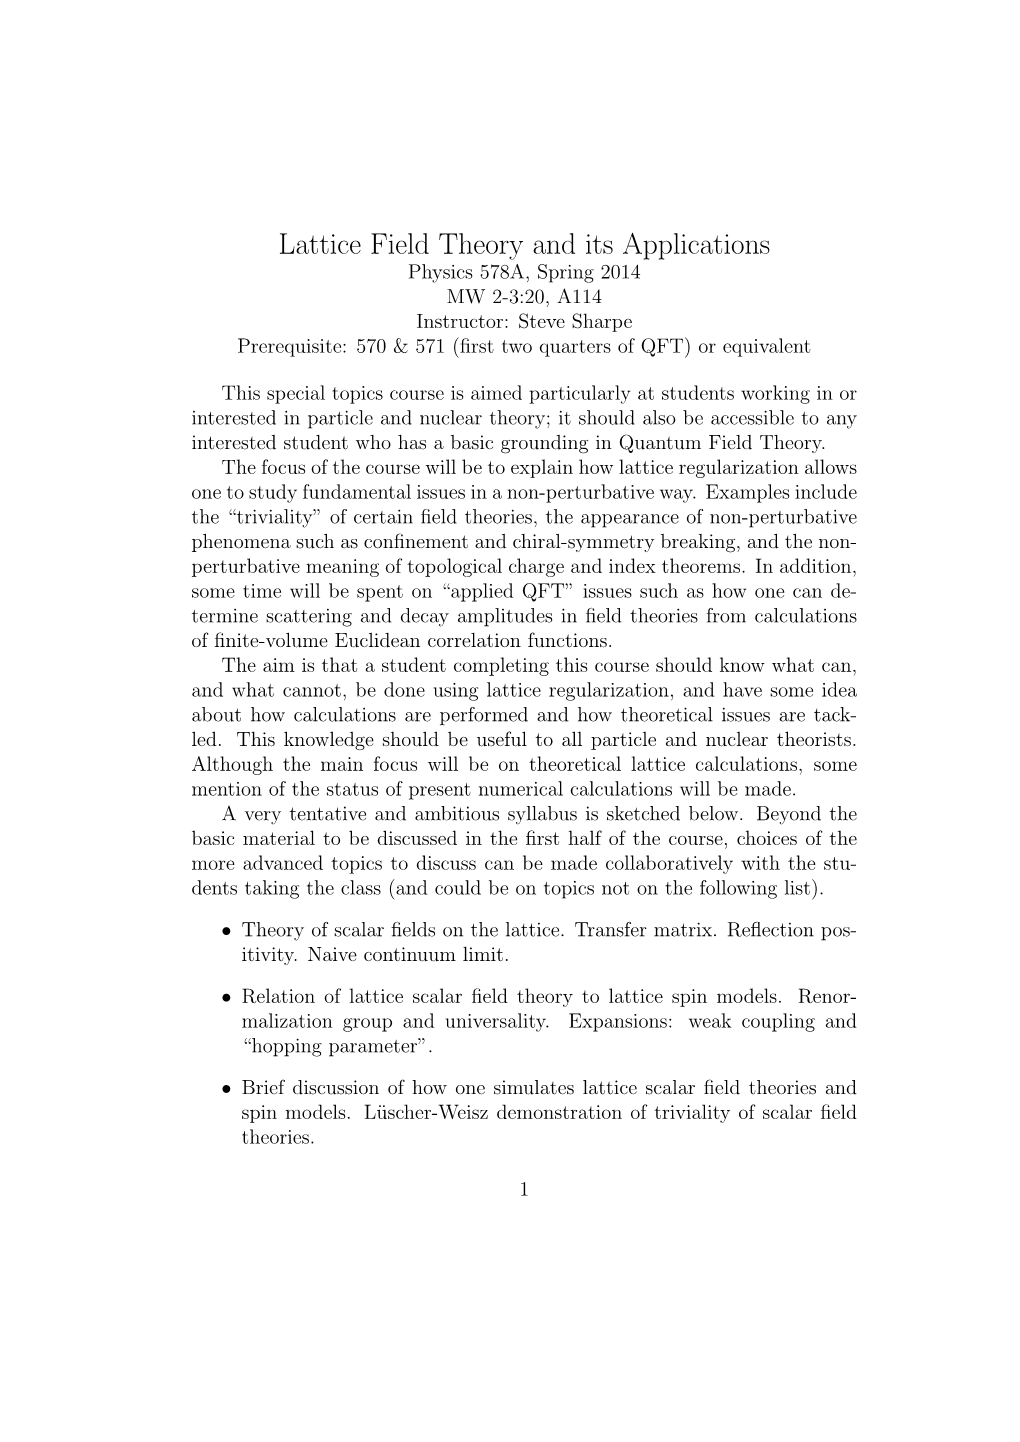 Lattice Field Theory and Its Applications